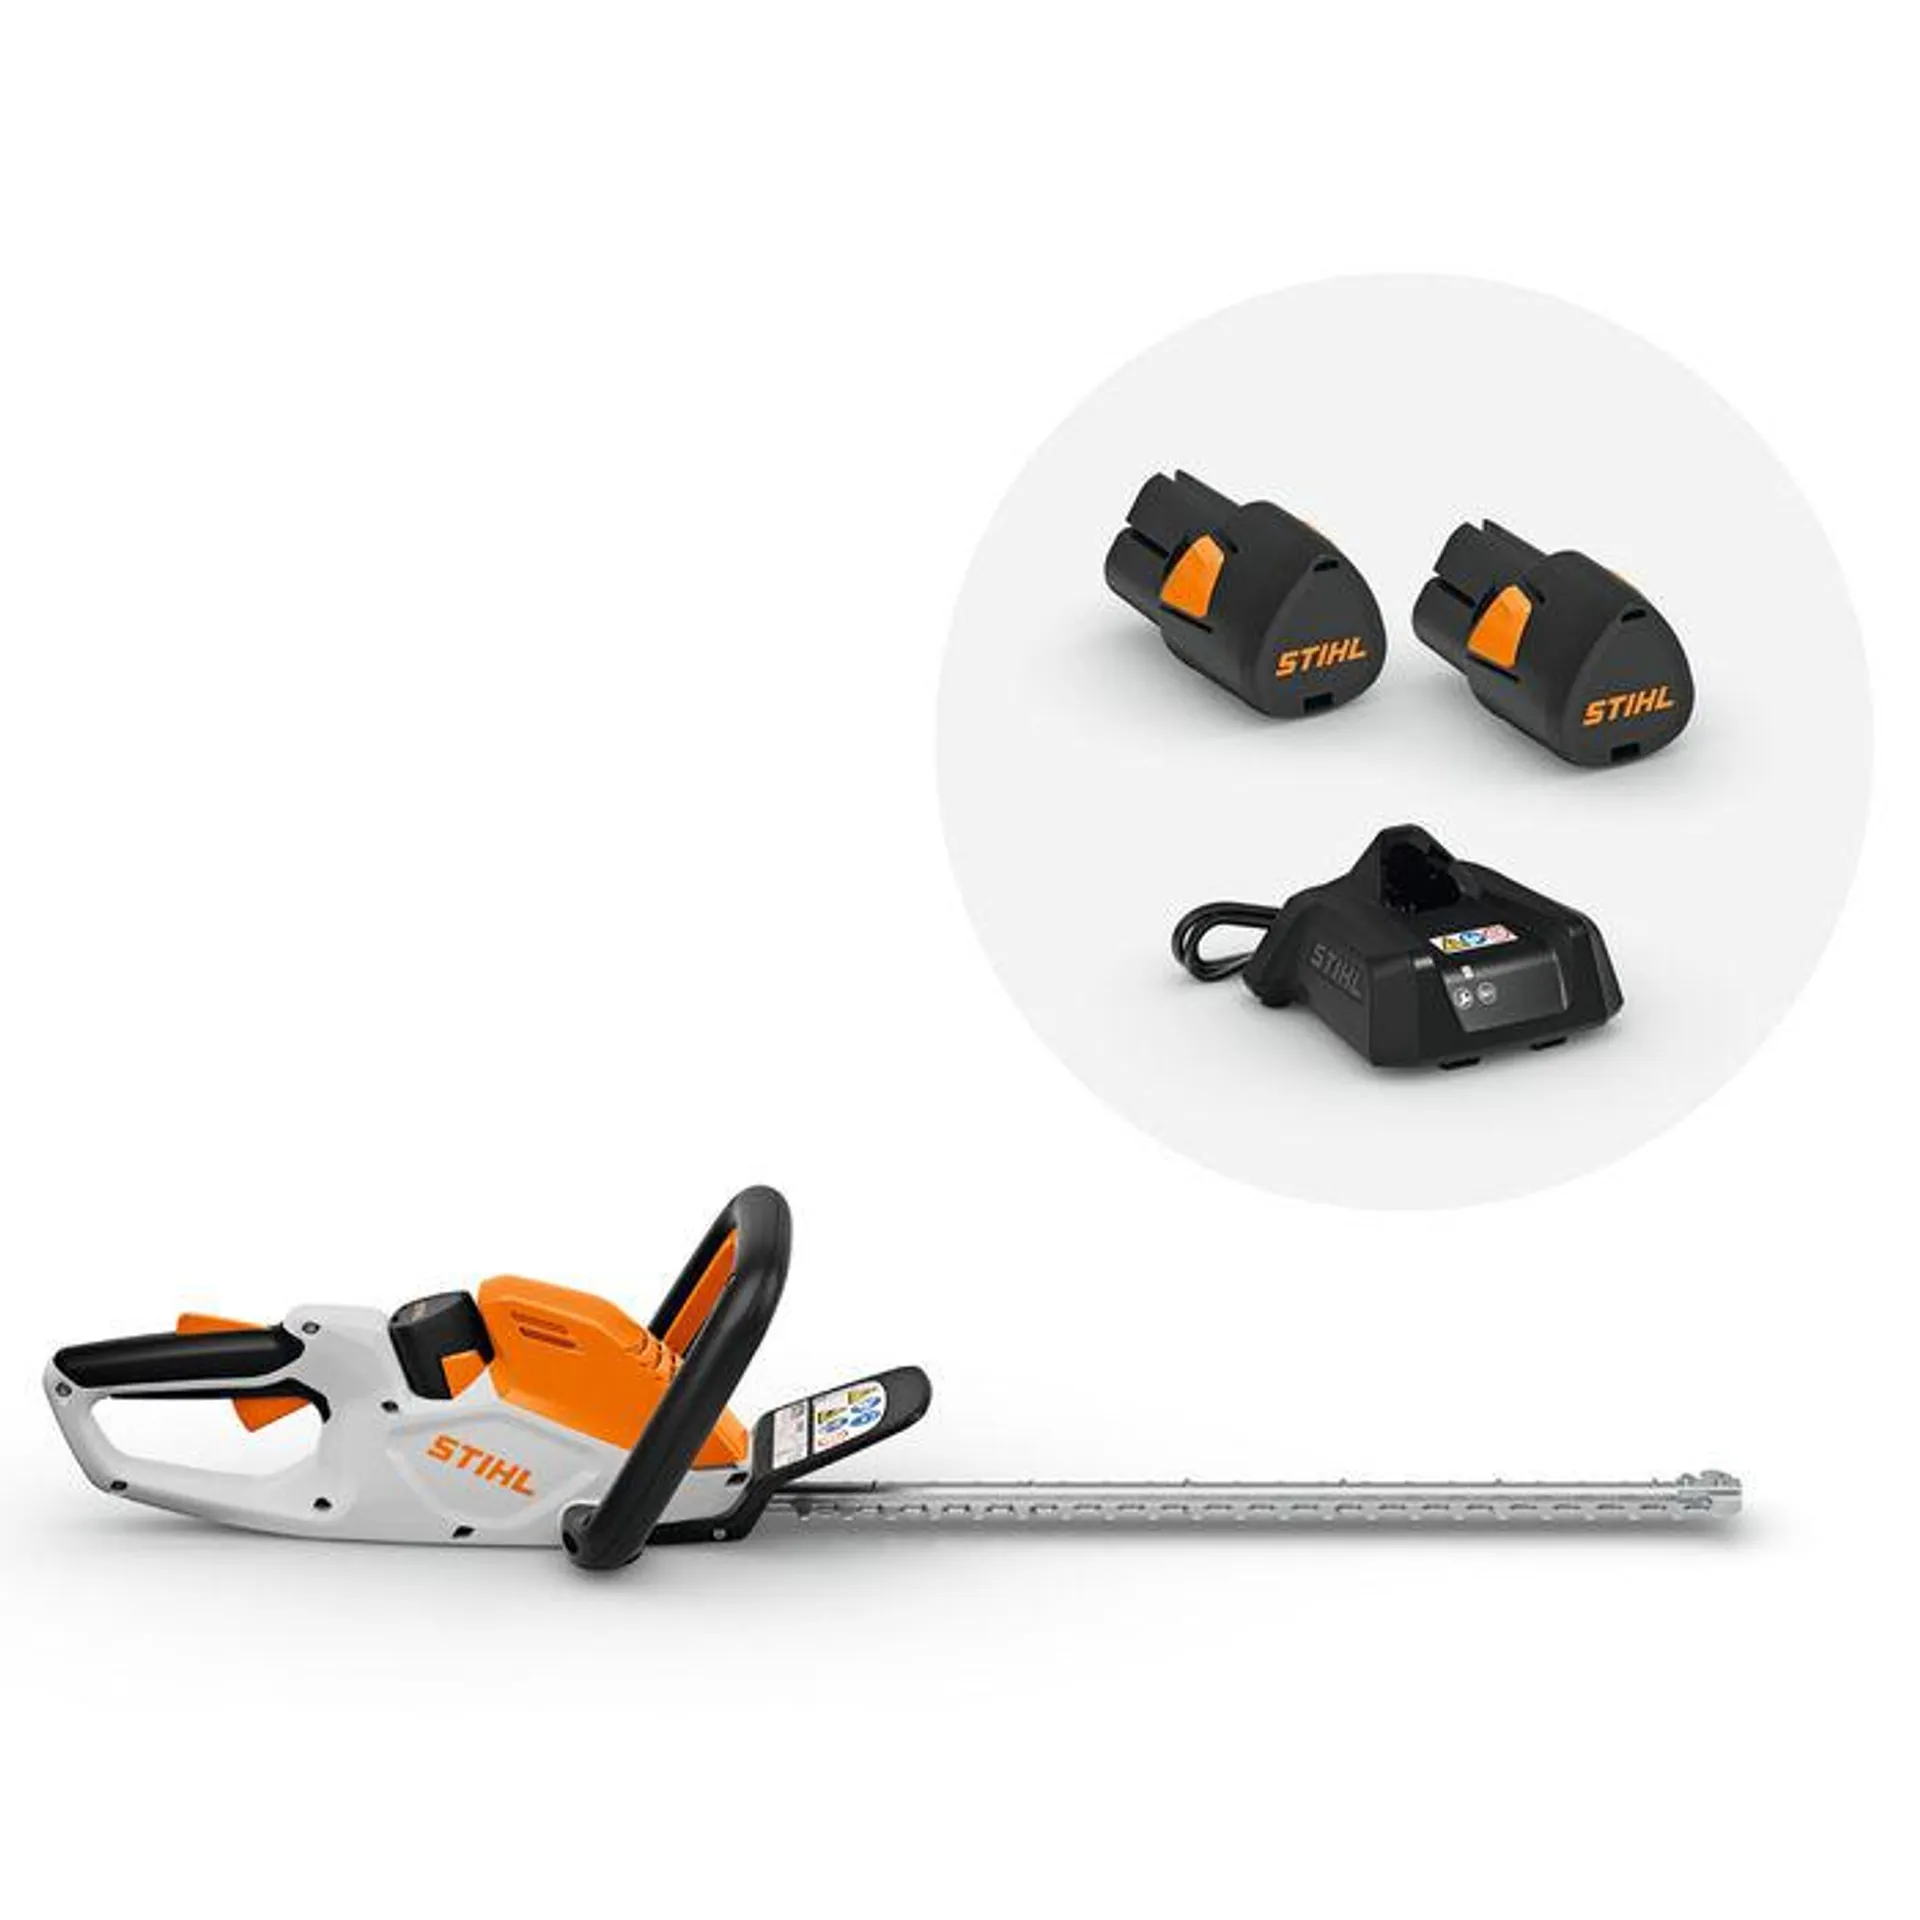 STIHL HSA 40 Battery Hedge Trimmer (With 2 Batteries & Charger)